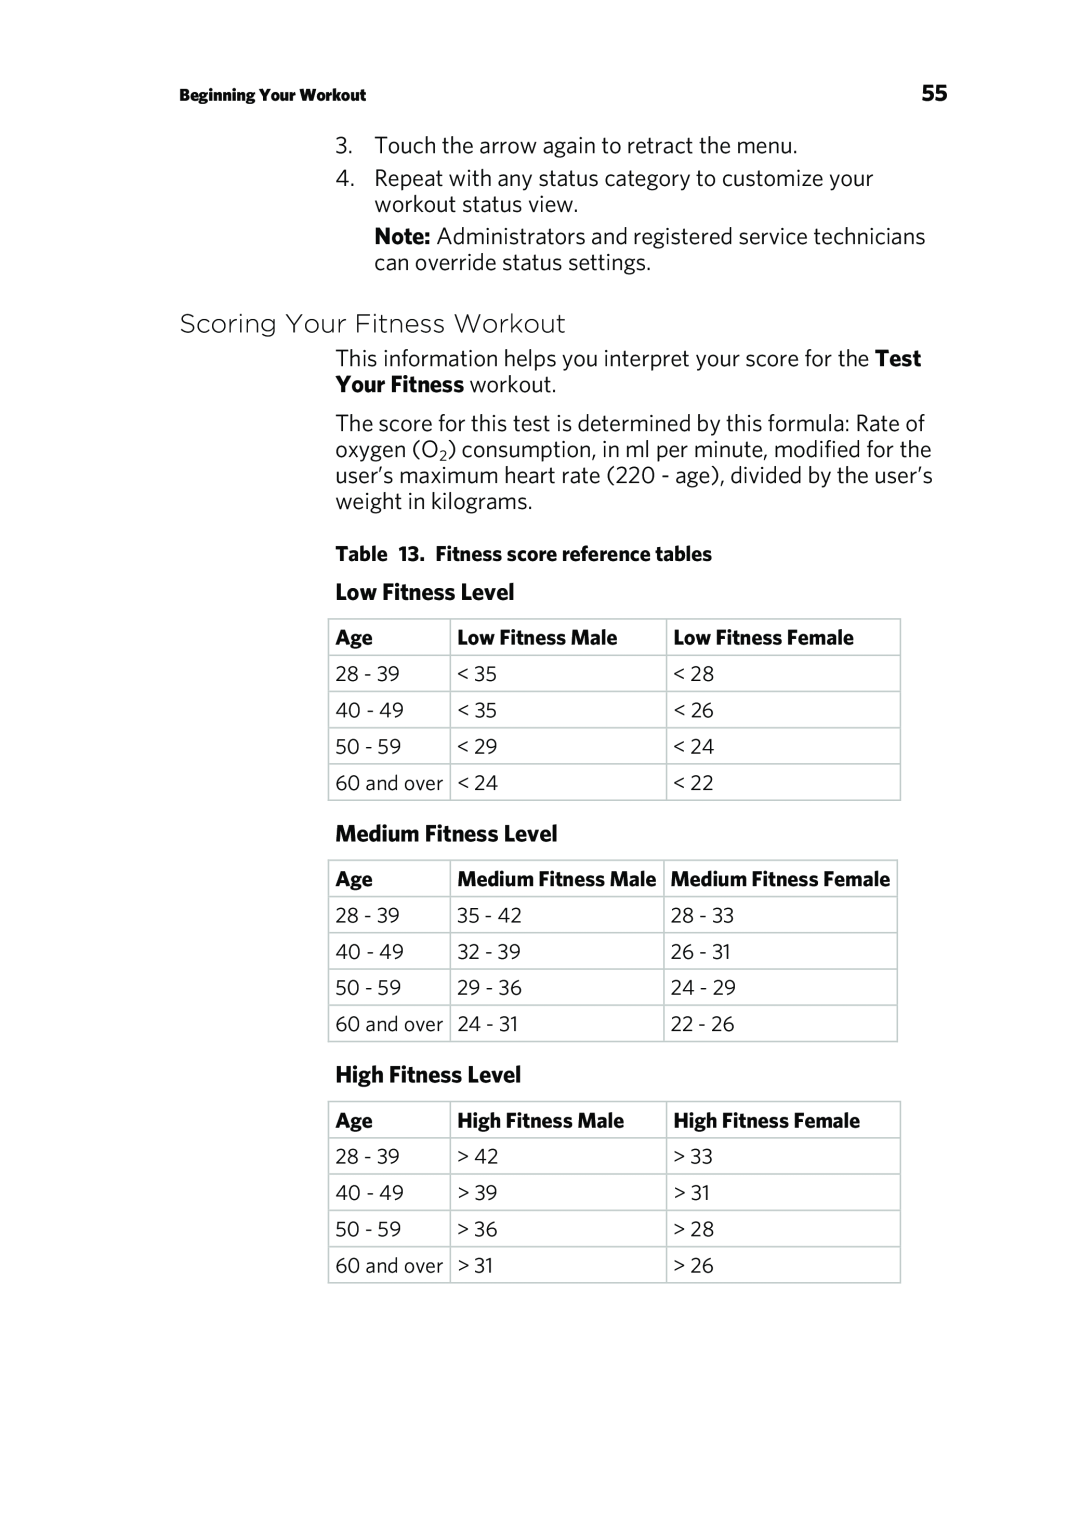 Precor P80 manual Scoring Your Fitness Workout, Low Fitness Level, Medium Fitness Level, High Fitness Level 